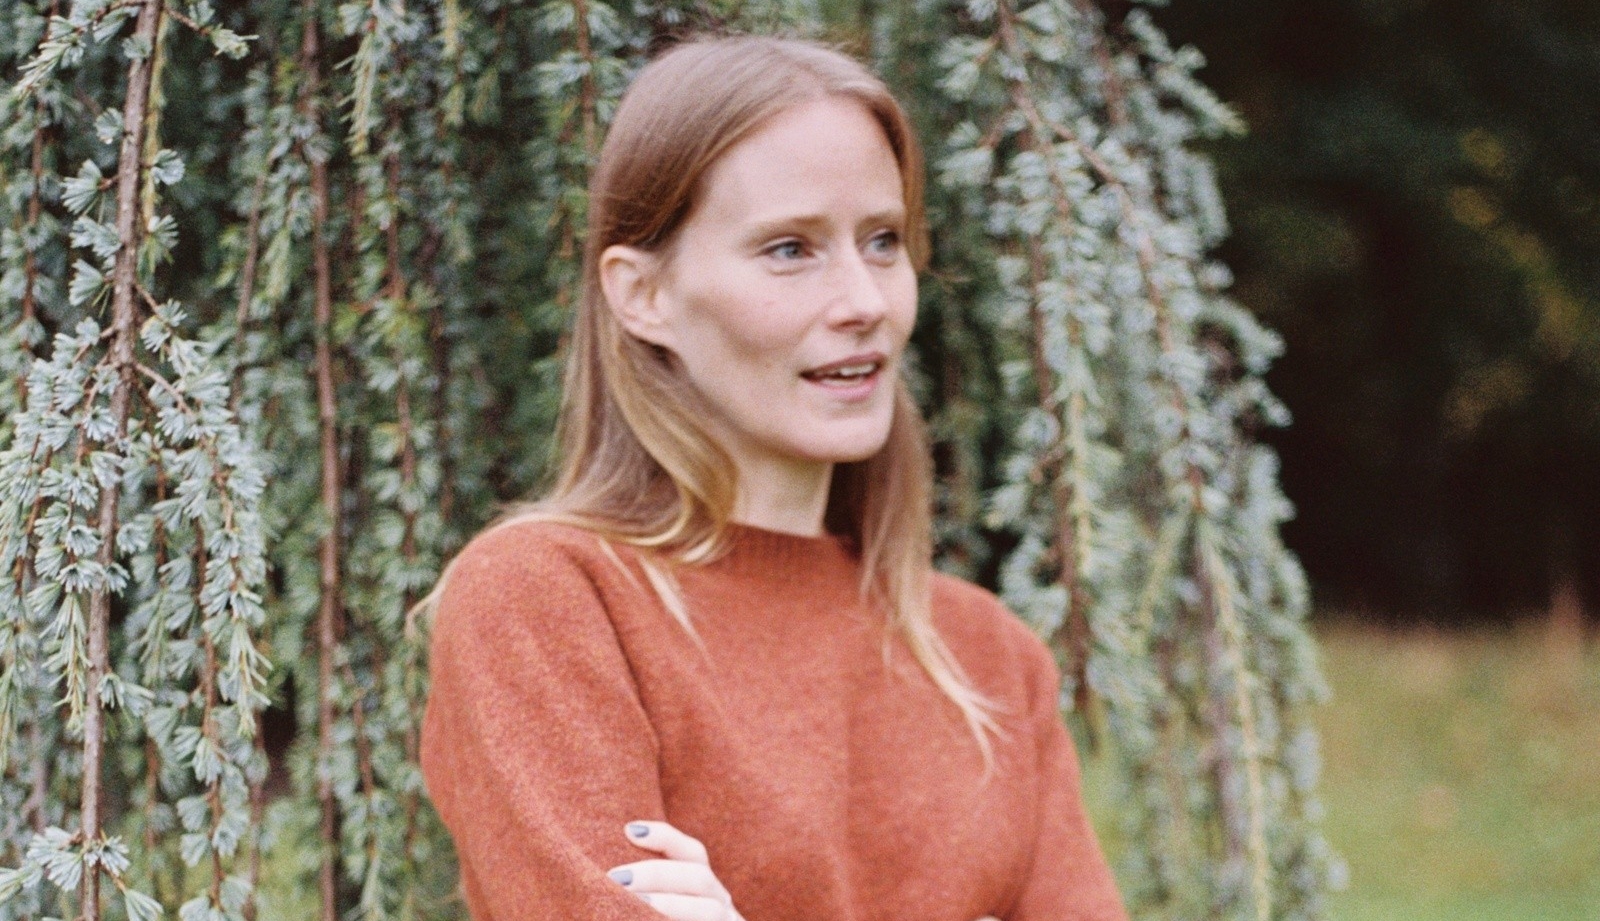 A woman with long blonde hair is wearing light red sweater, standing in front of a tree